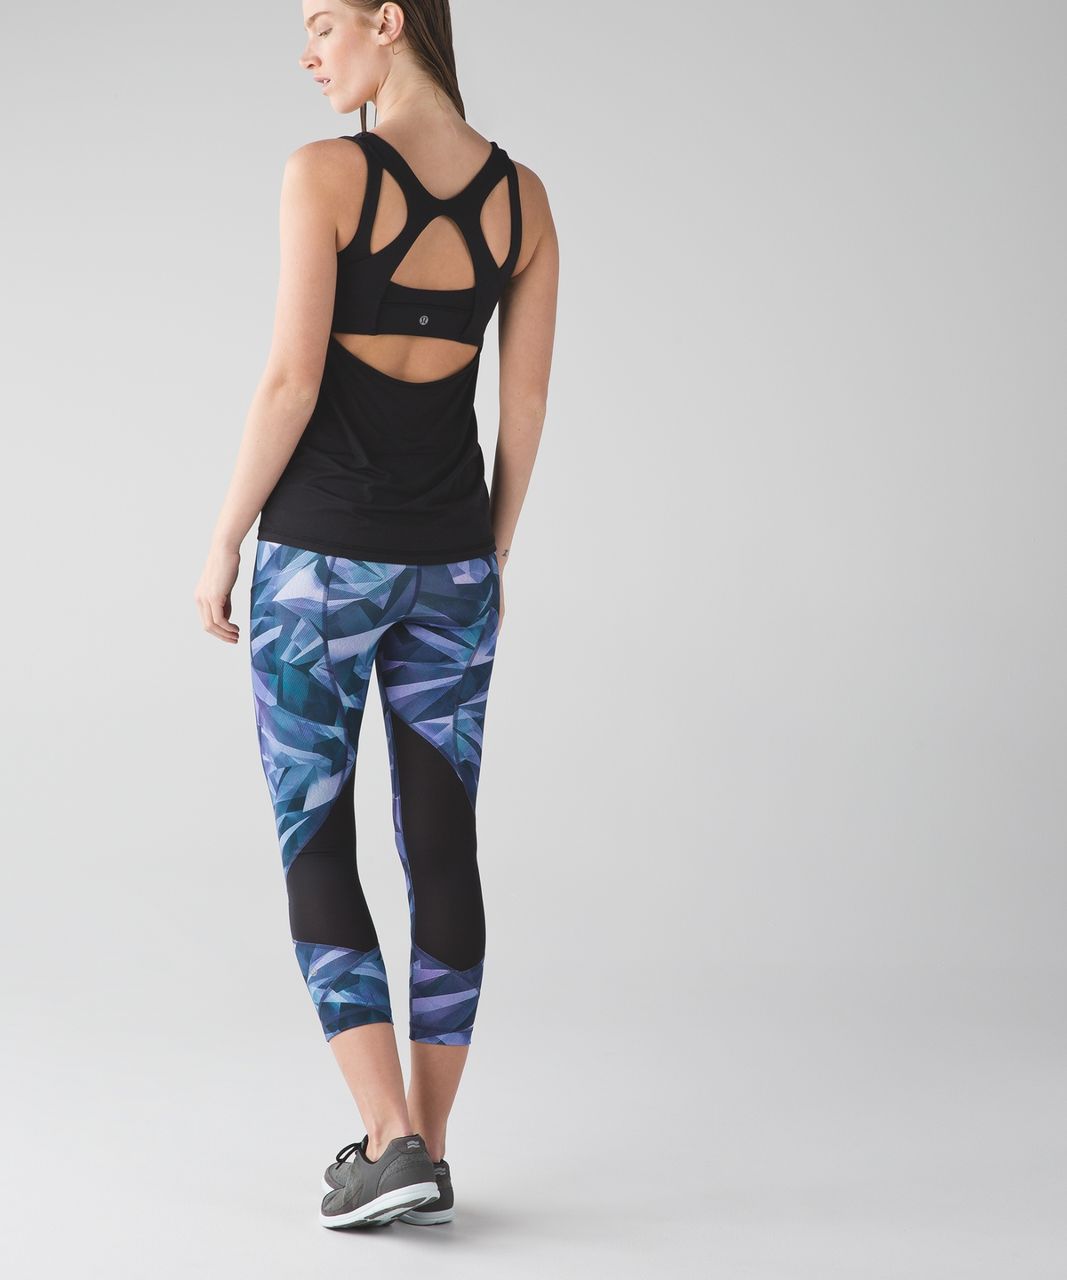 Lululemon Pace Rival Crop *Full-On Luxtreme - Pretty Prism Multi / Black